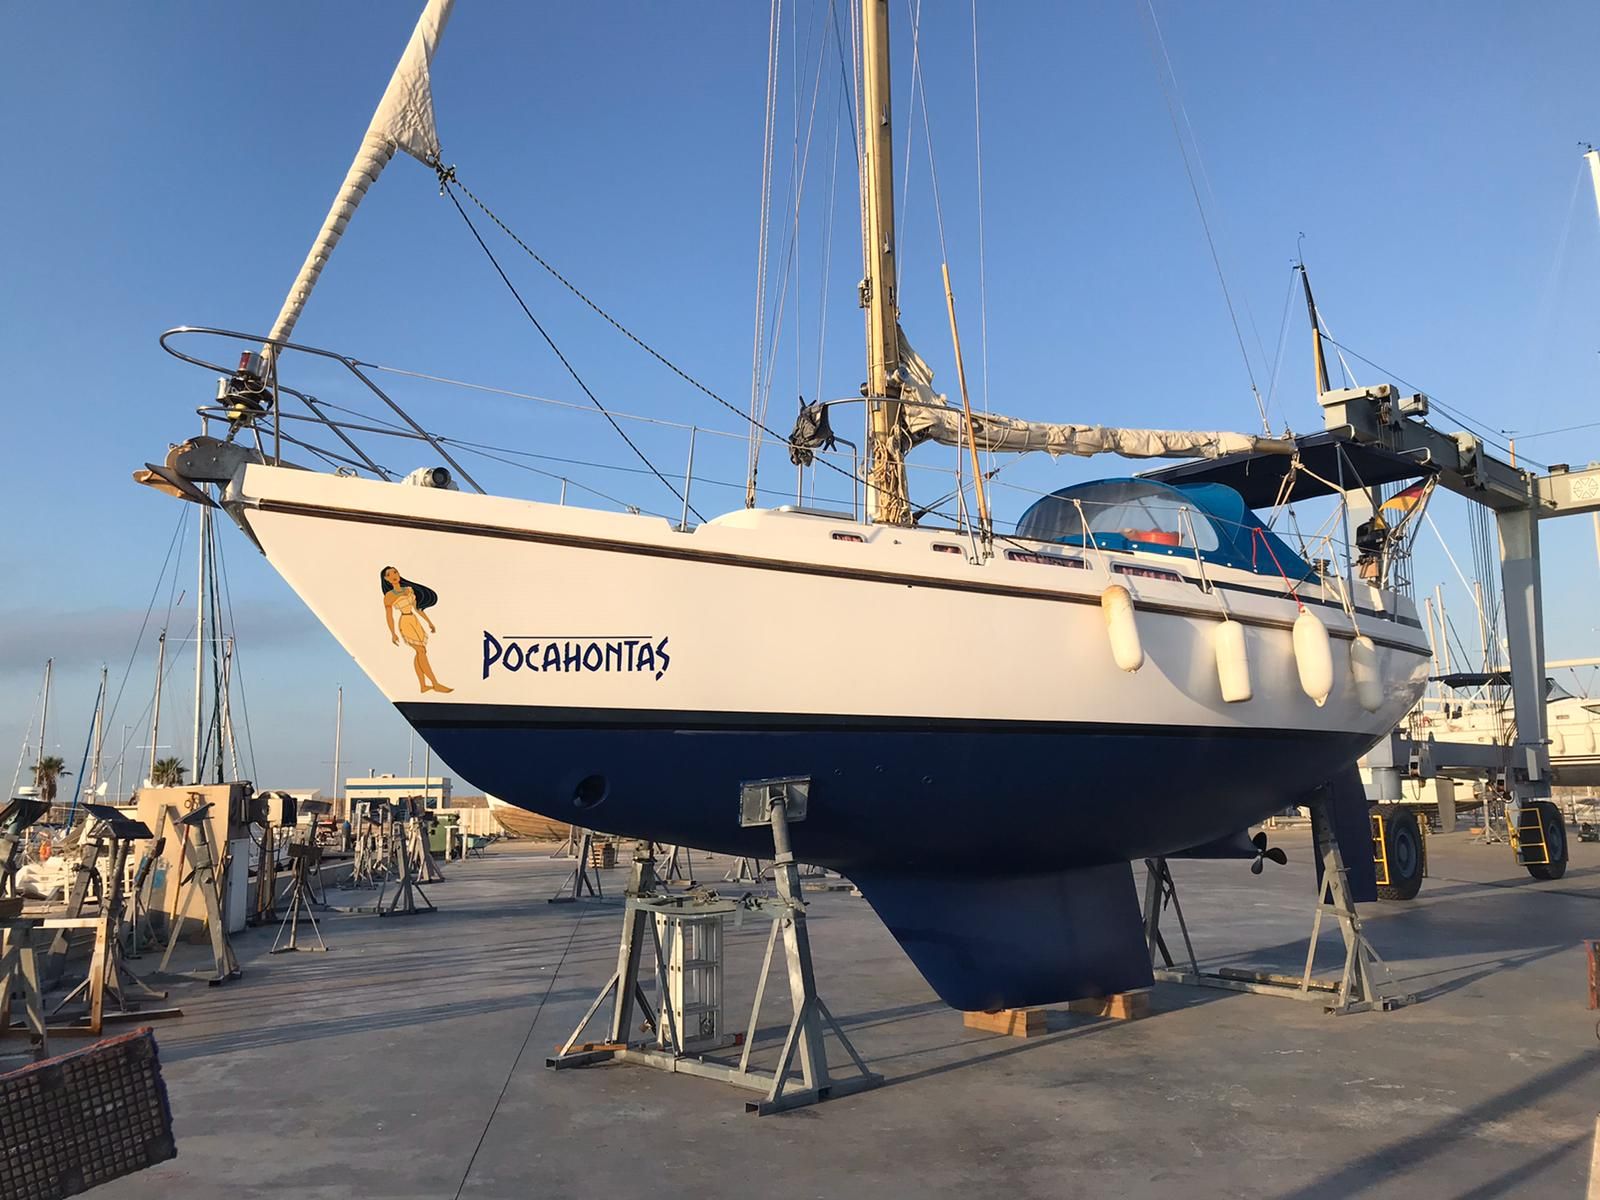 34 ft sailboats for sale